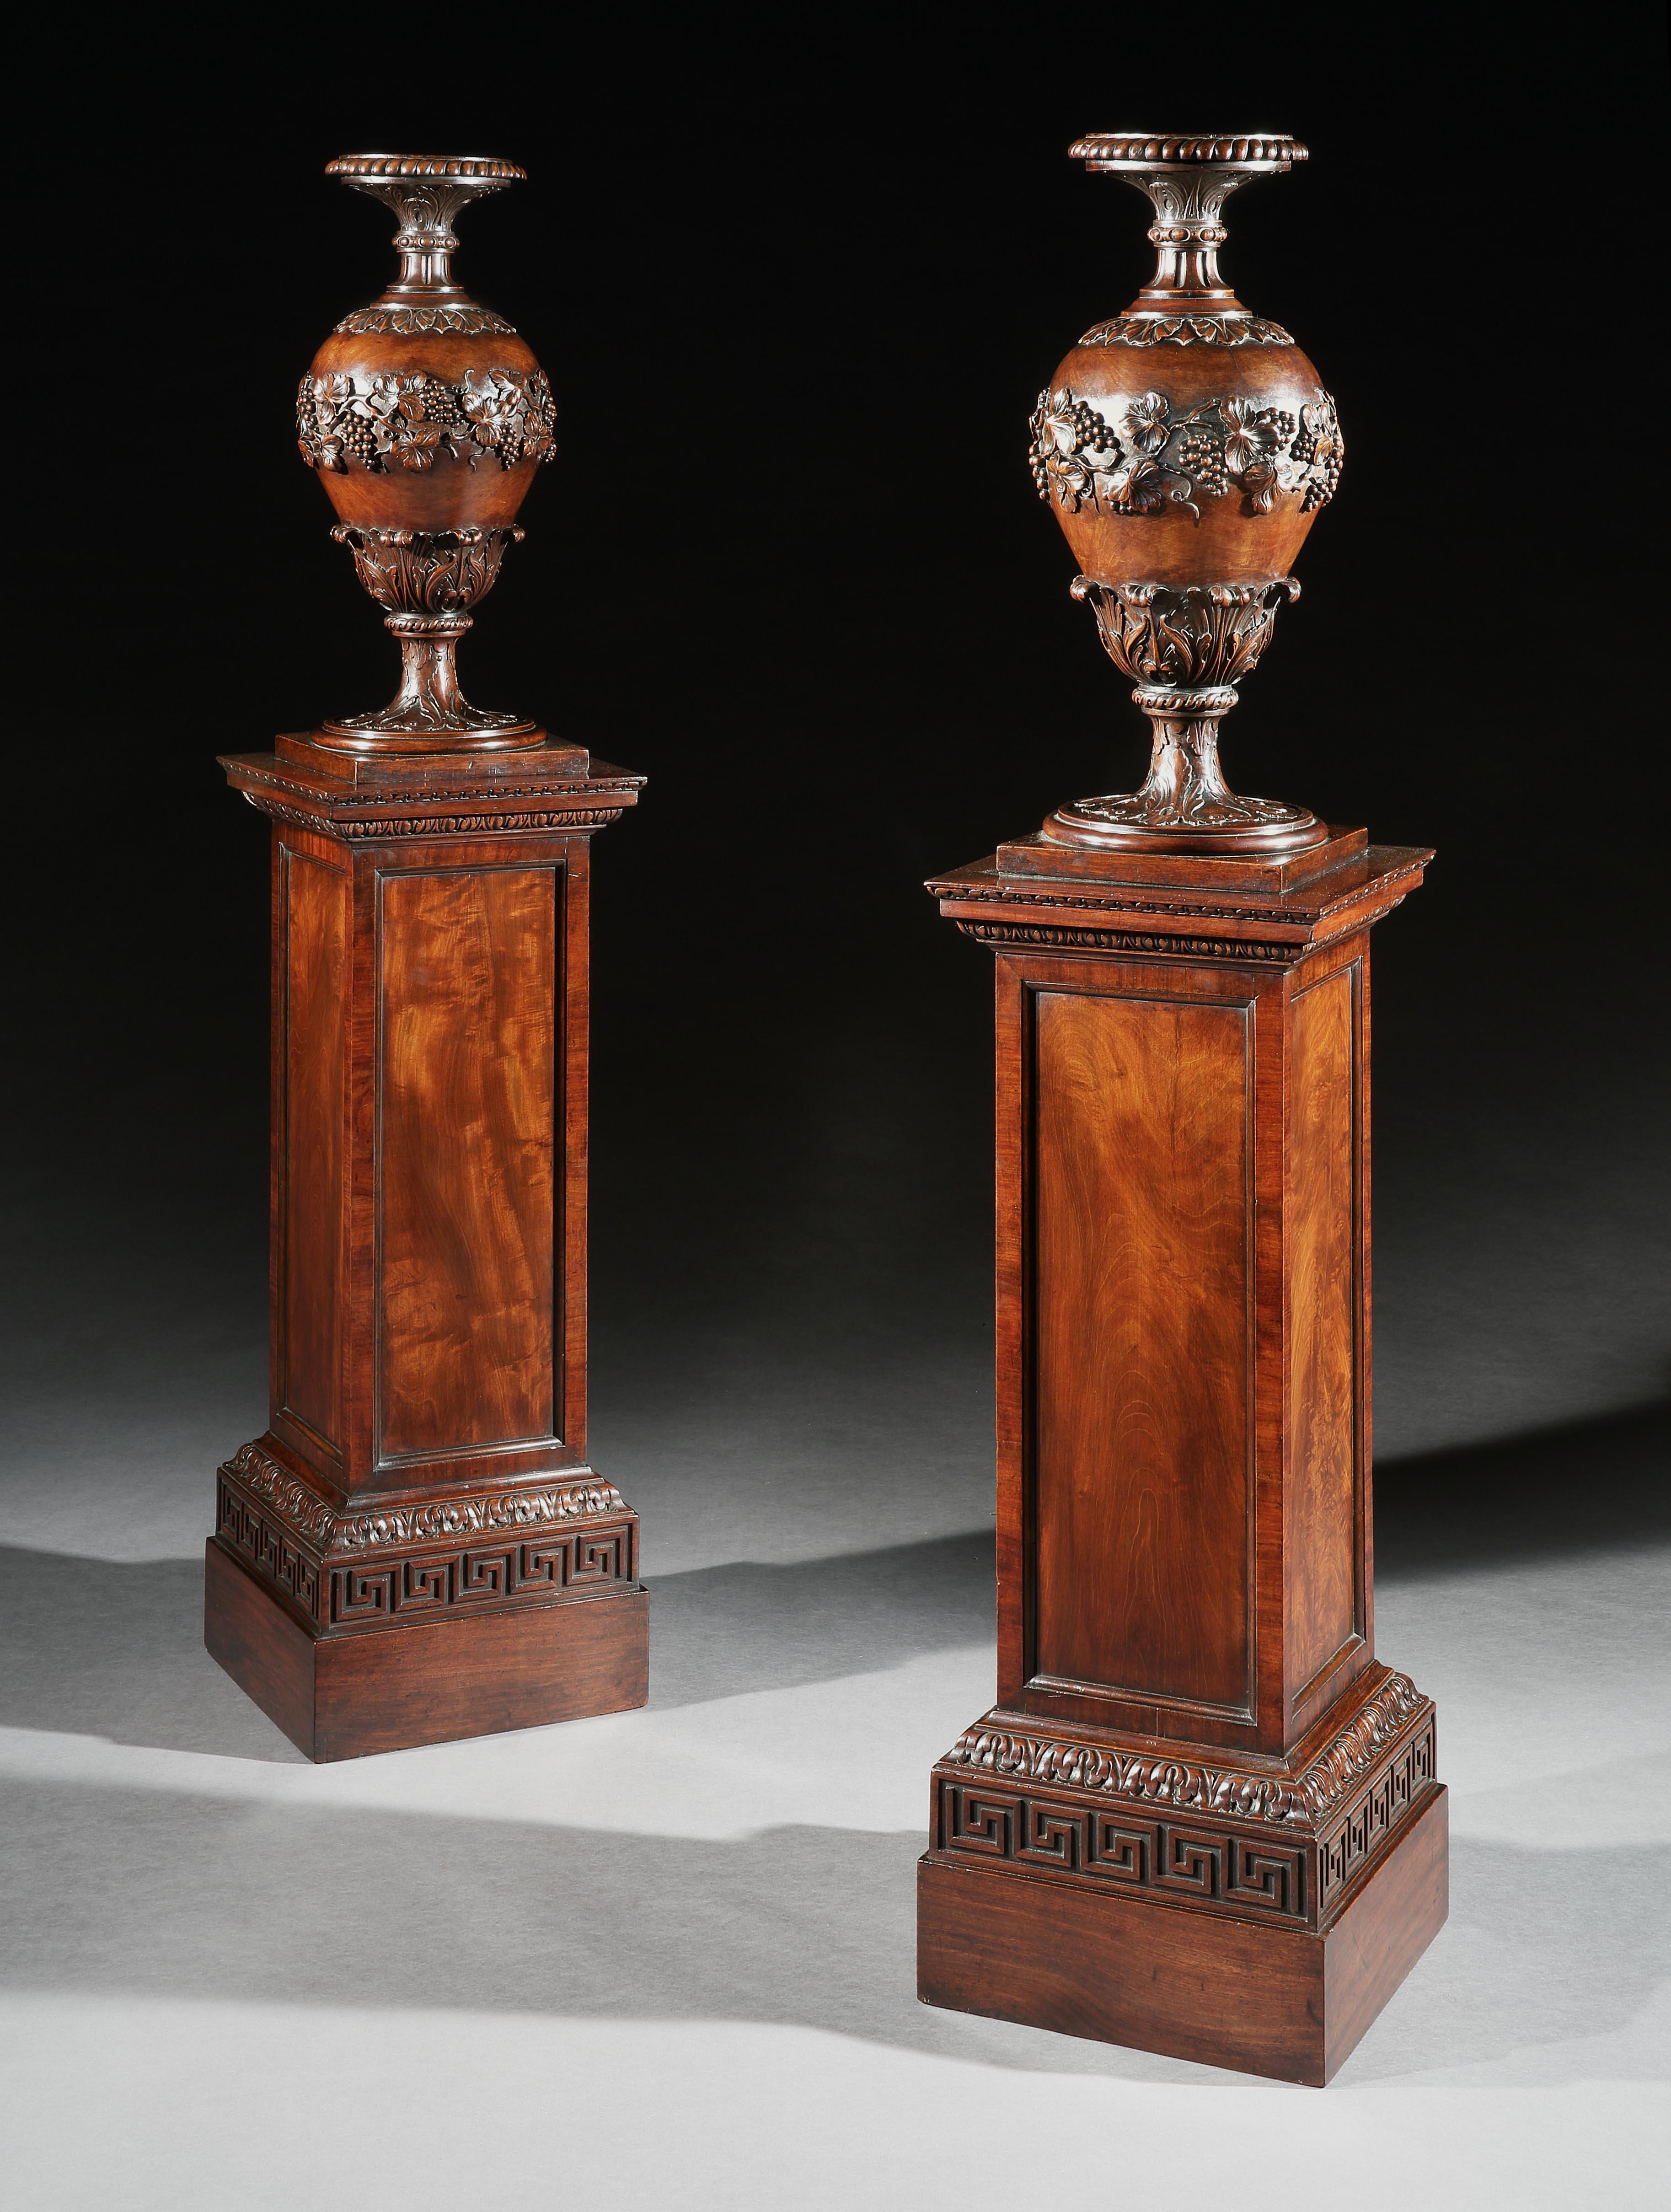 A rare pair of George IV mahogany torcheres, the upper sections having superbly carved urns of acanthus and bunches of grapes hanging from the vine leaves, above a well figured paneled plinth base carved with acanthus, egg and dart moulding's as